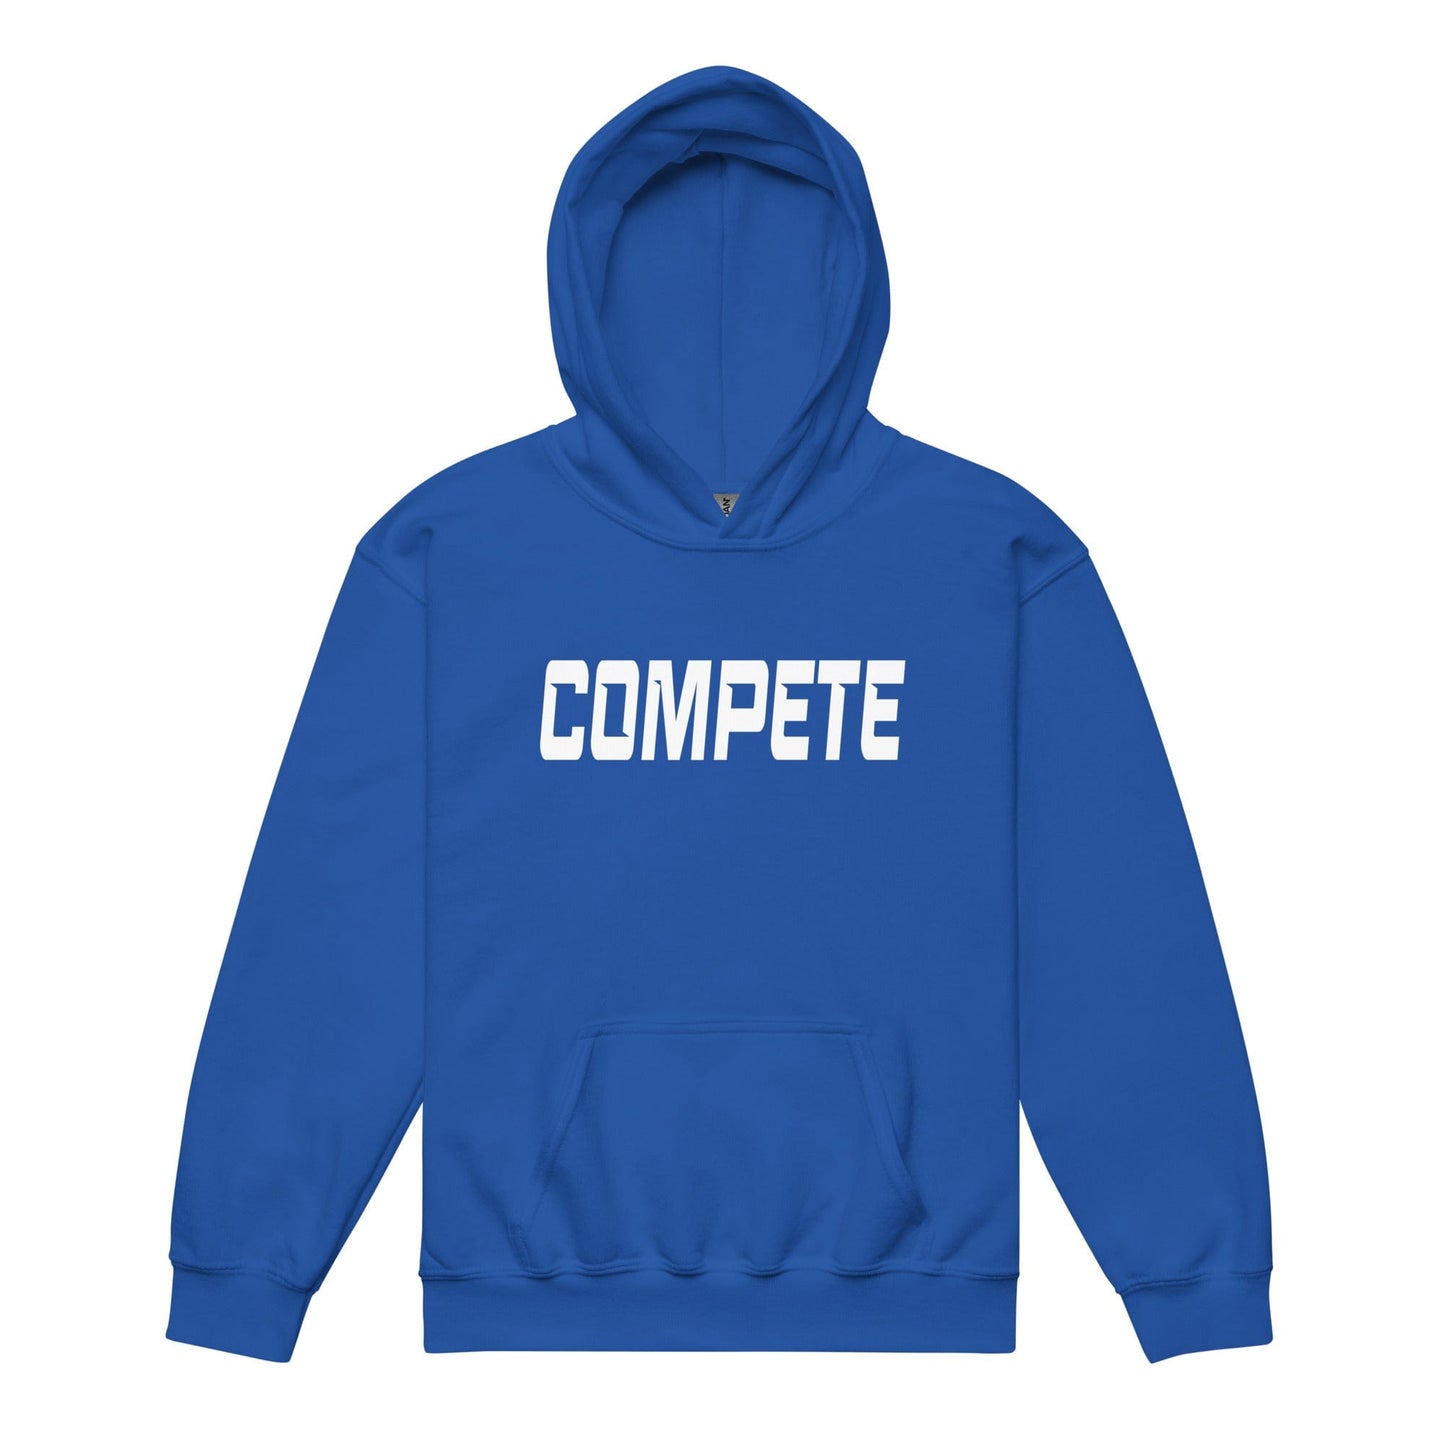 Compete - Youth Hoodie